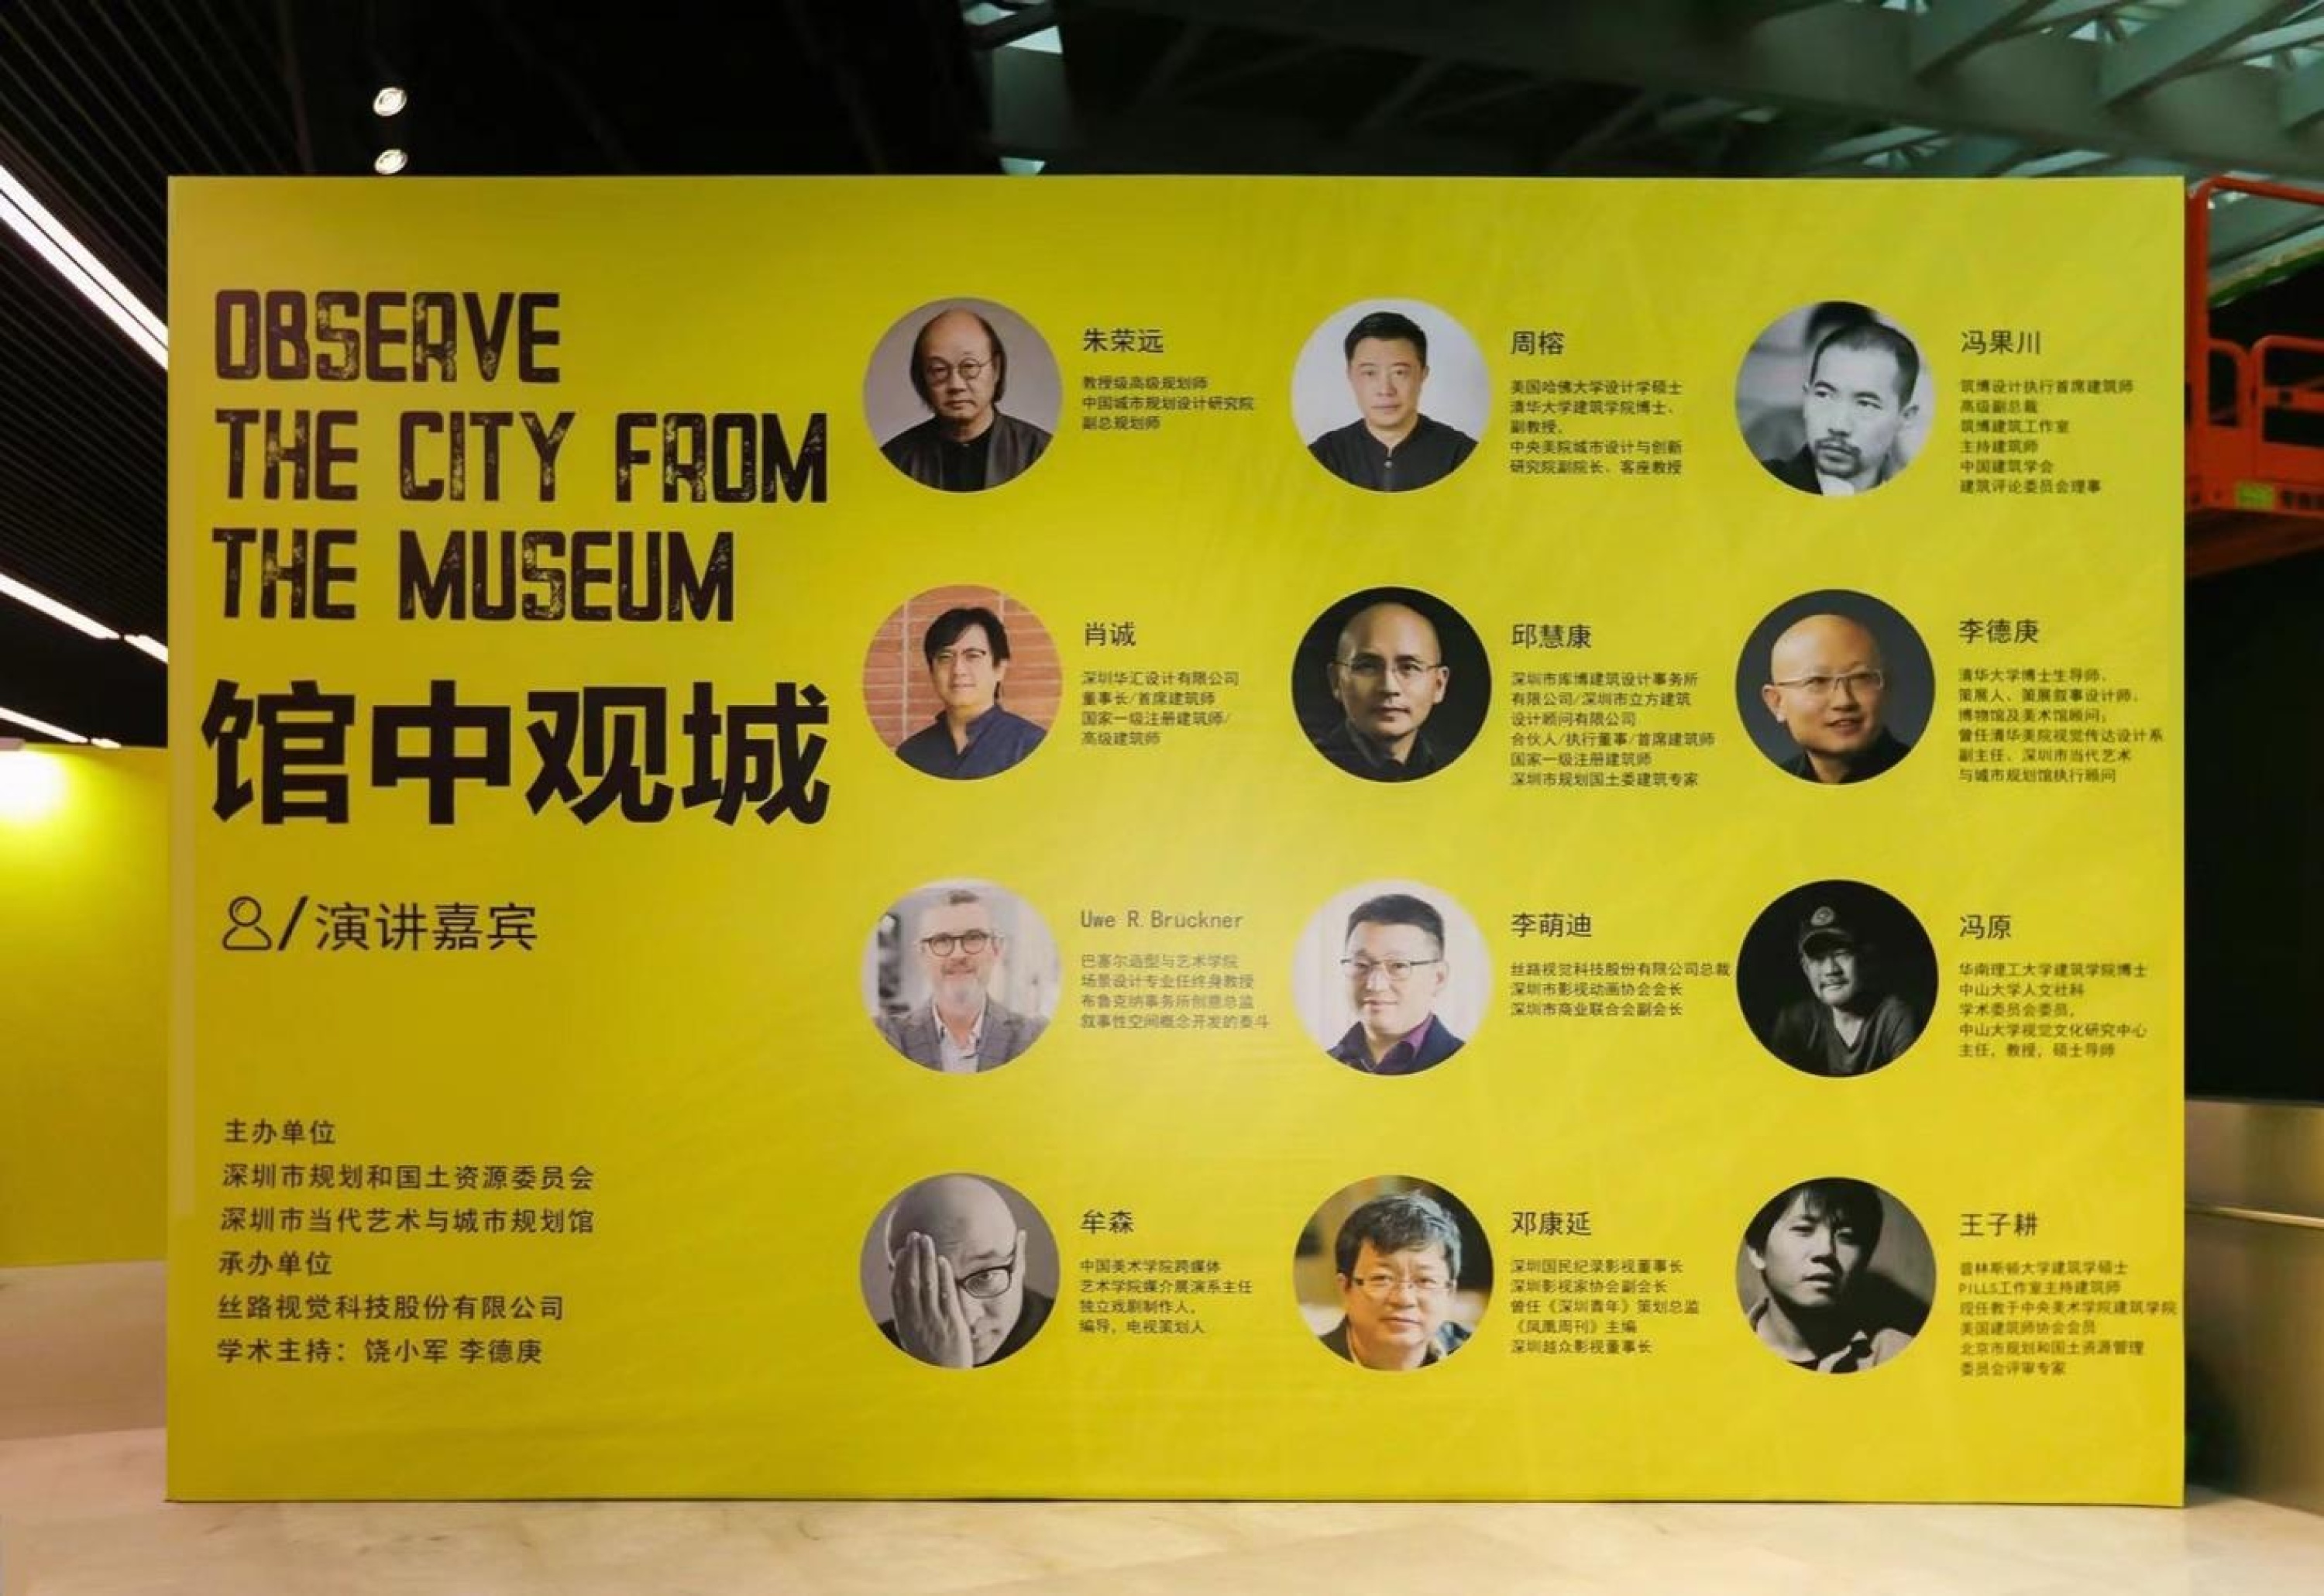 Zigeng Wang was Invited to Attend the “Observe the City from the Museum” Forum of Shenzhen Contemporary Art and Urban Planning Museum